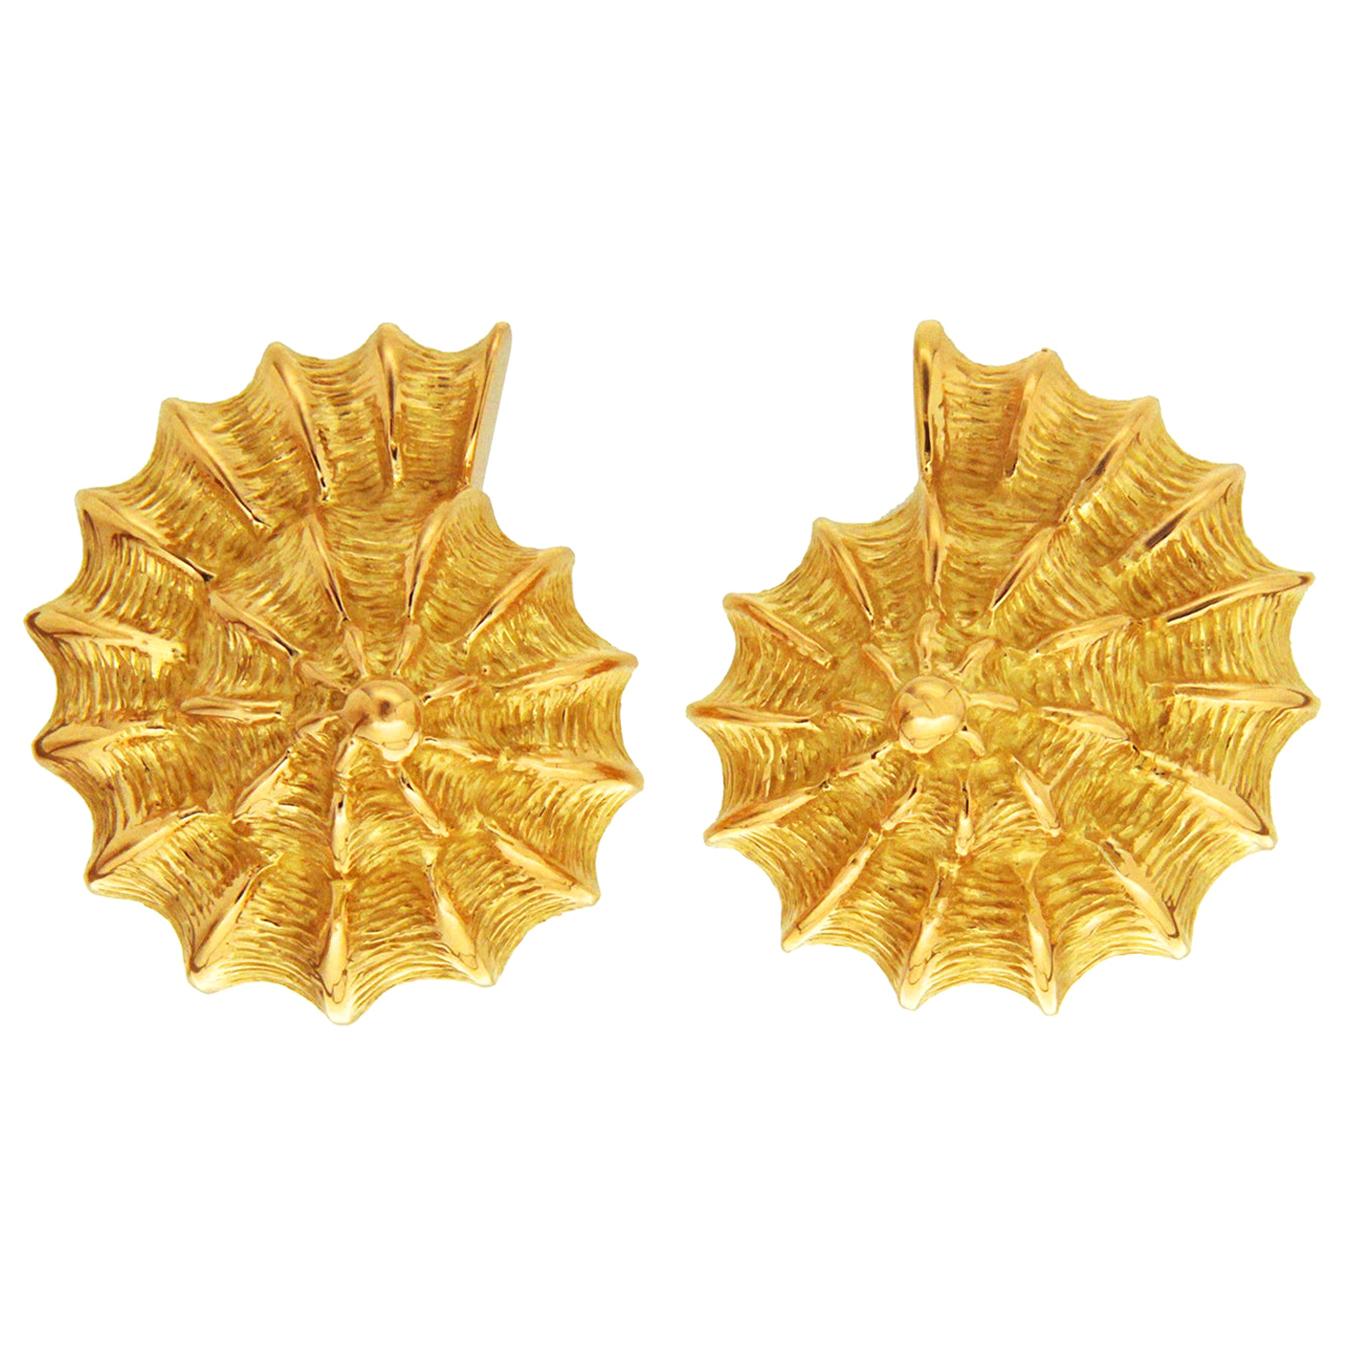 Valentin Magro Yellow Gold Scalloped Shell Earrings